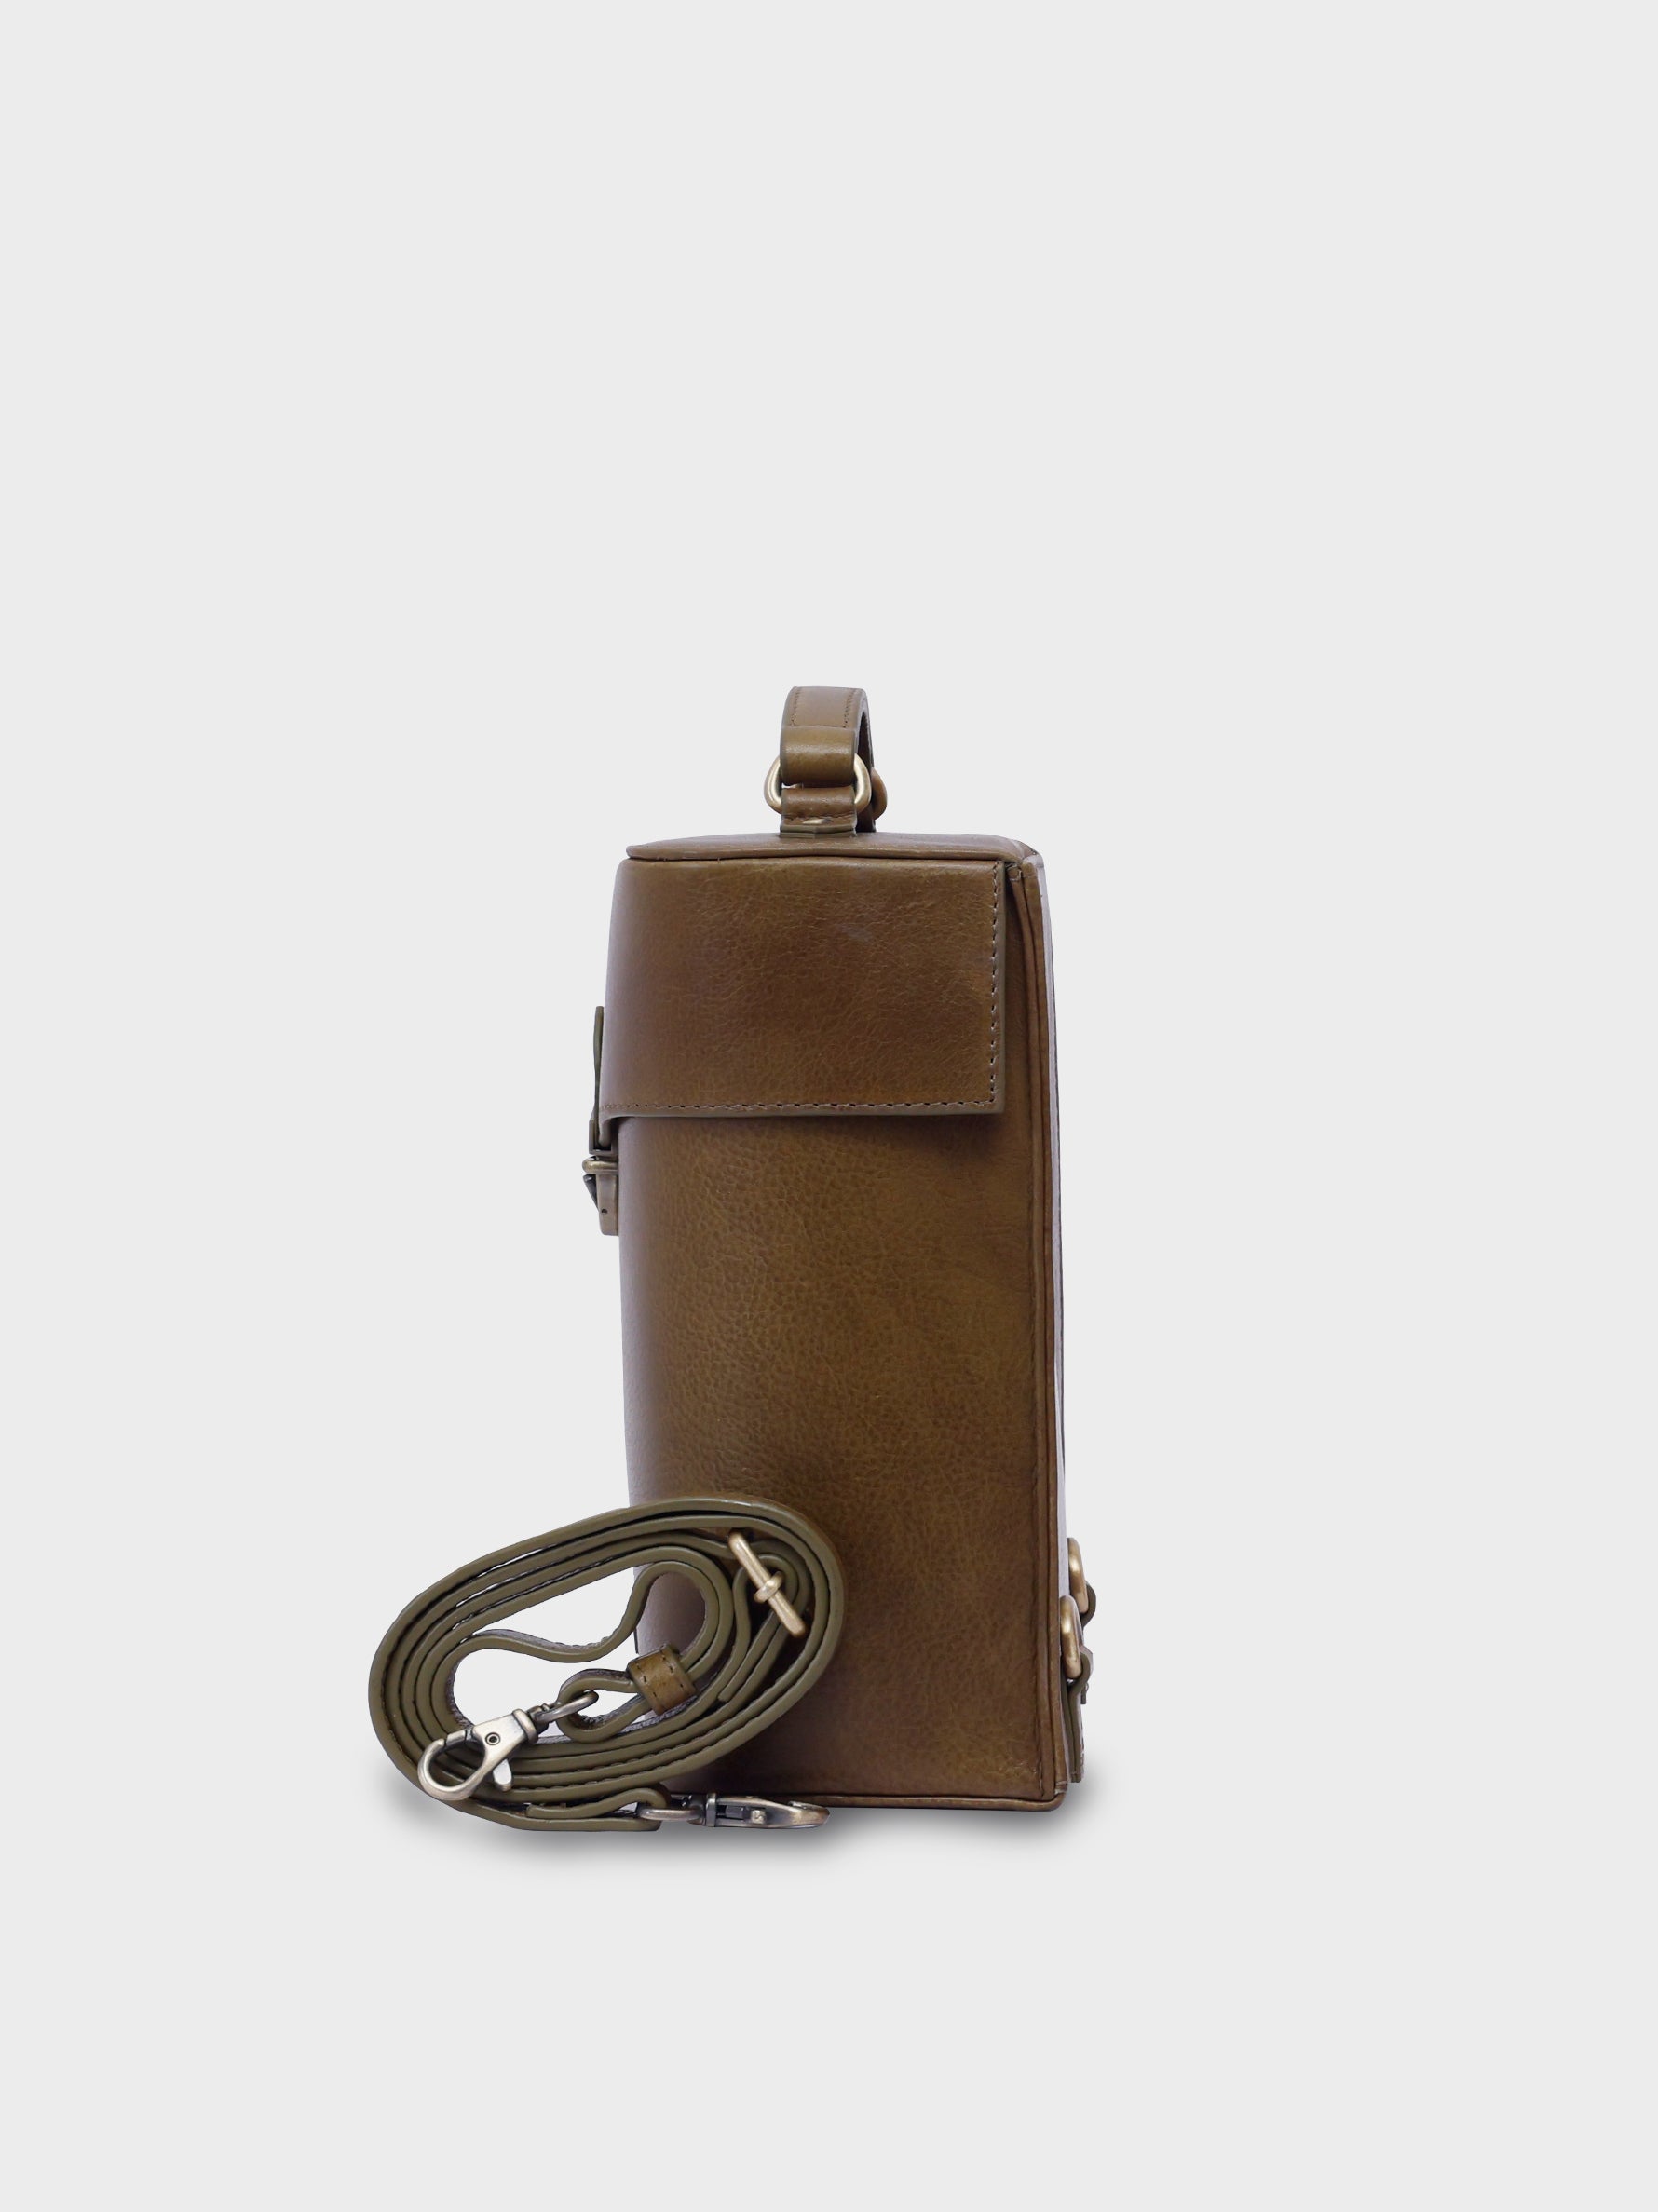 Handcrafted Genuine Vegetable Tanned Leather Letter Box Backpack Olive Green for Women Tan & Loom